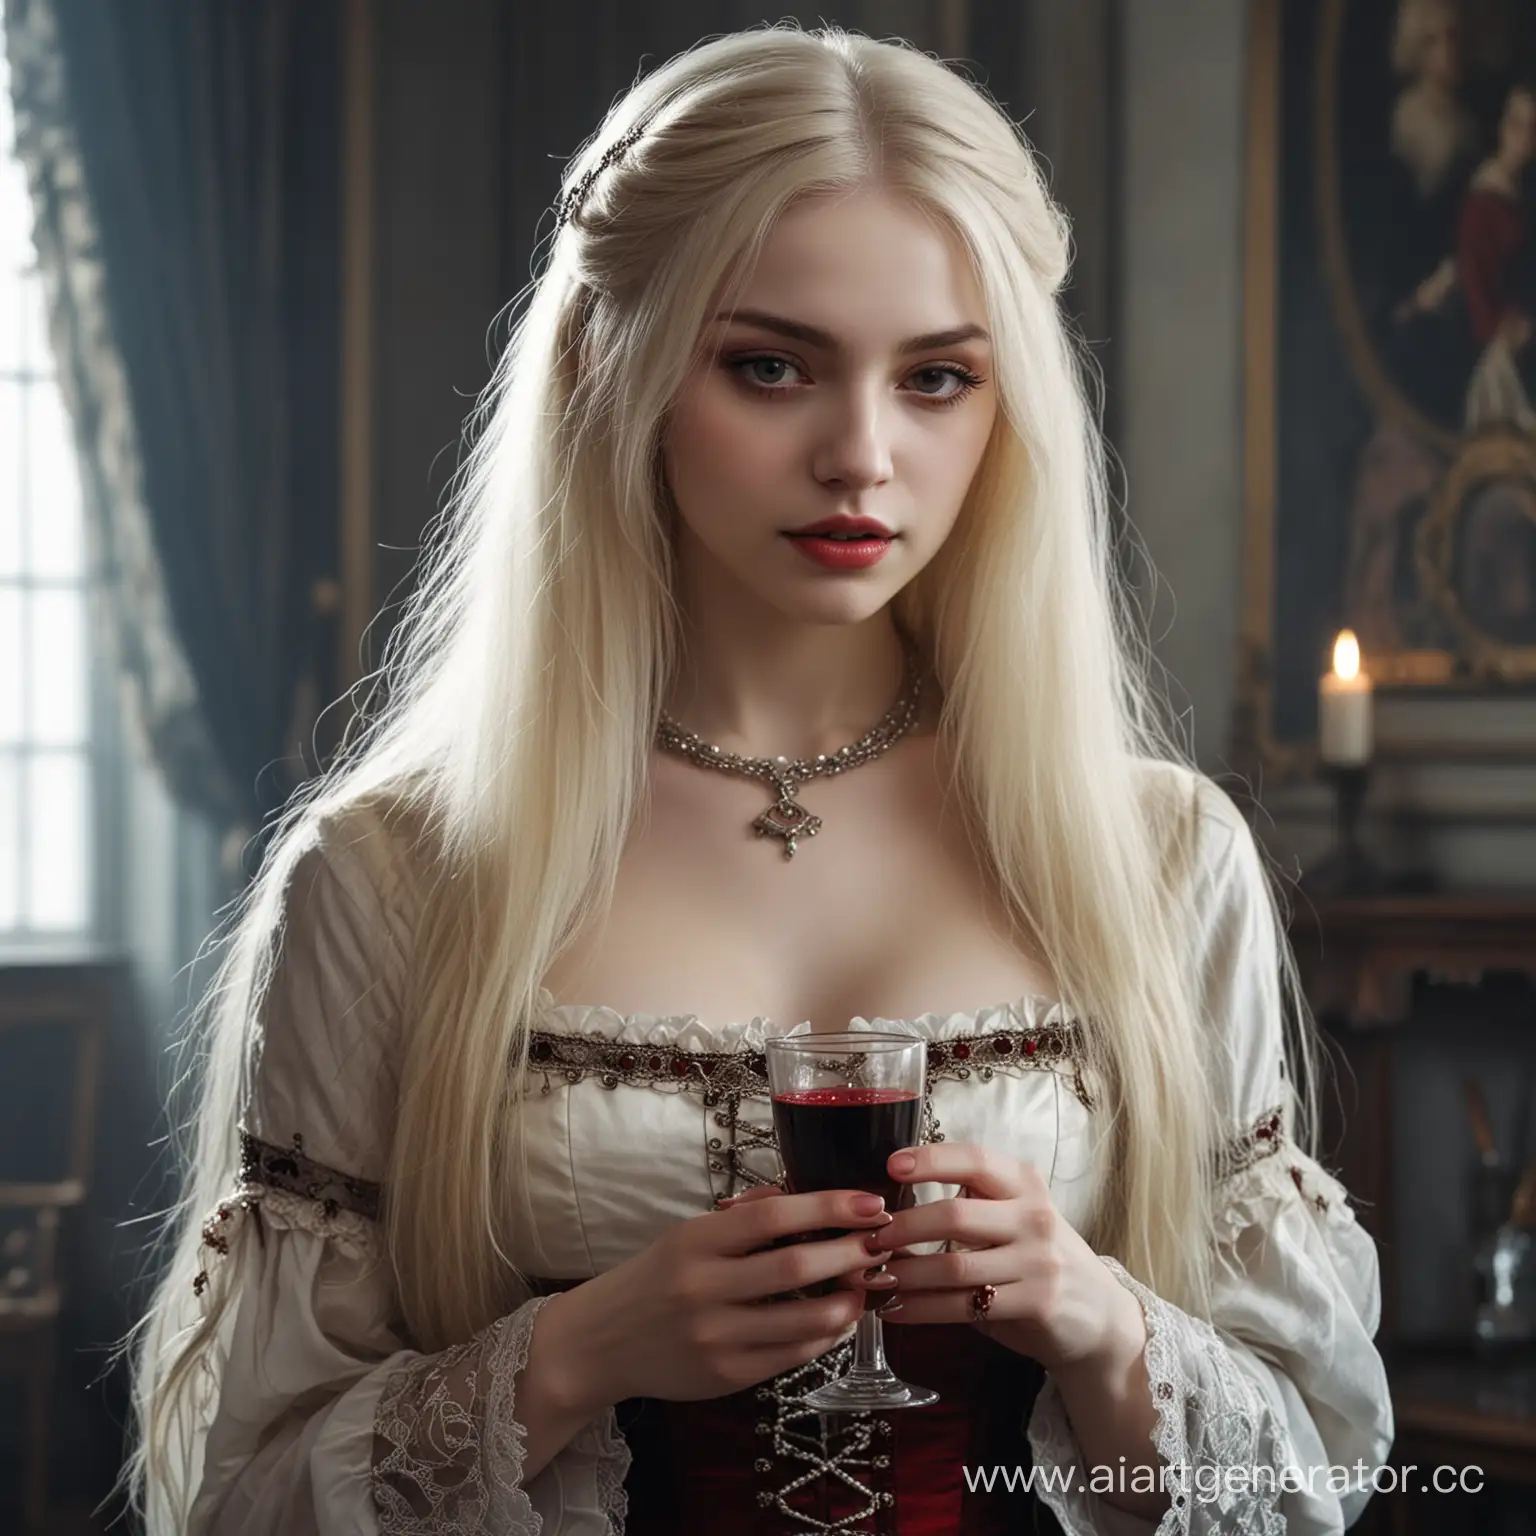 Aristocratic-Young-Vampire-Girl-Holding-a-Glass-of-Blood-in-a-Fantasy-World